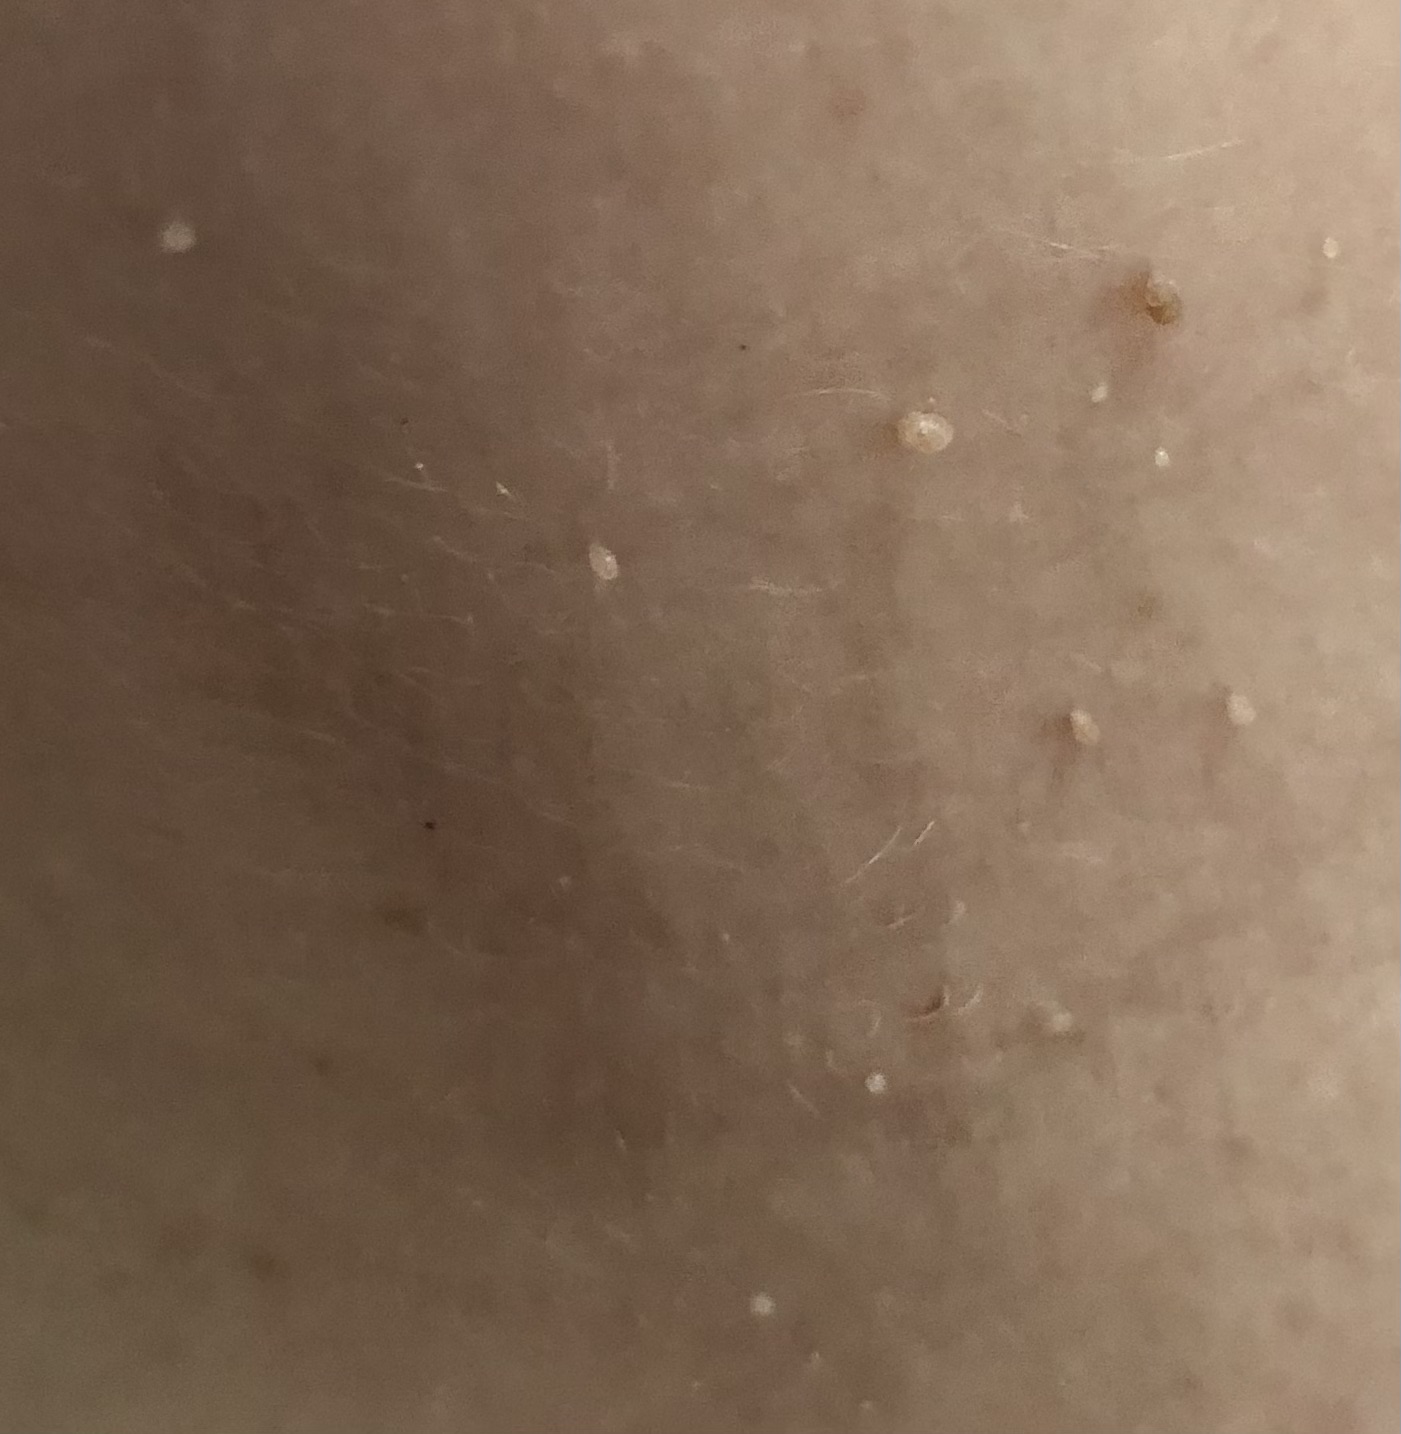 What Causes Skin Tags (Acrochordons)?